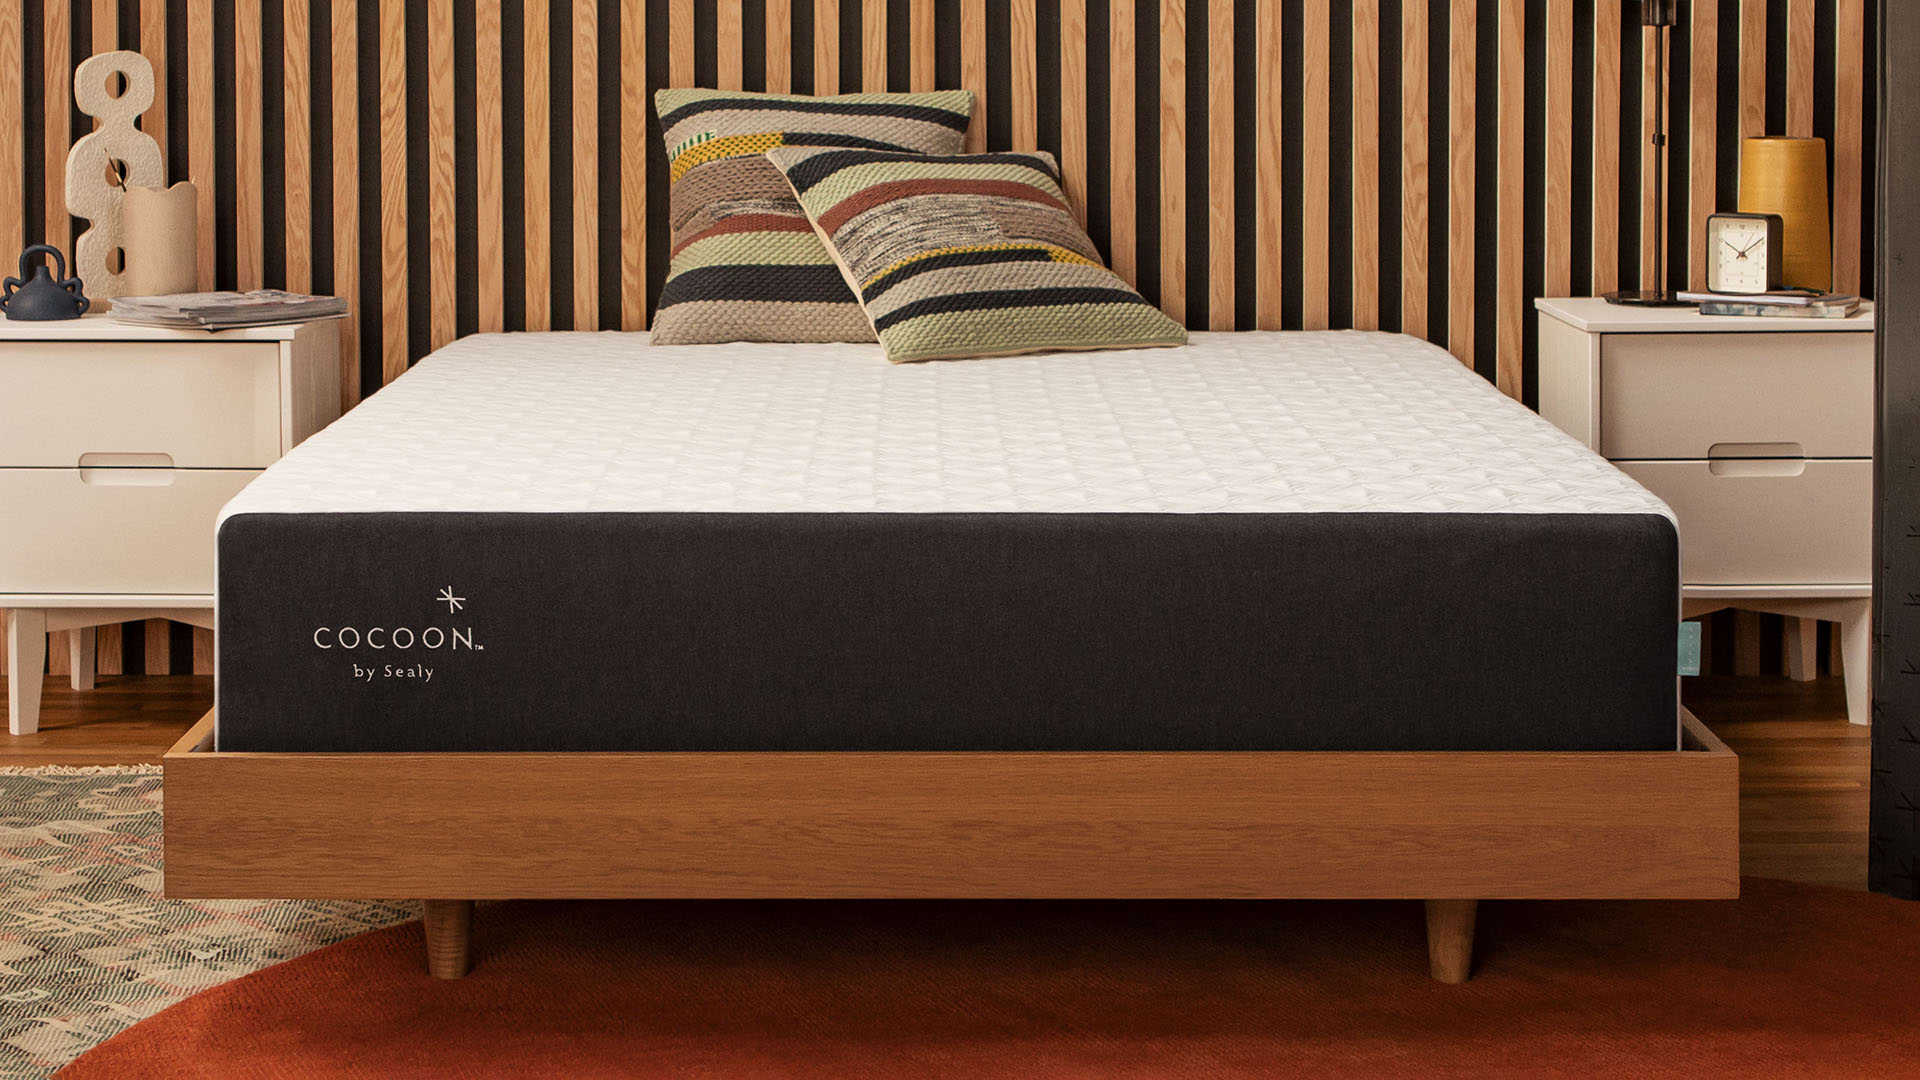 The Cocoon by Sealy Chill mattress, shown here in wood panelled bedroom, is the best queen mattress for hot sleepers on a small budget